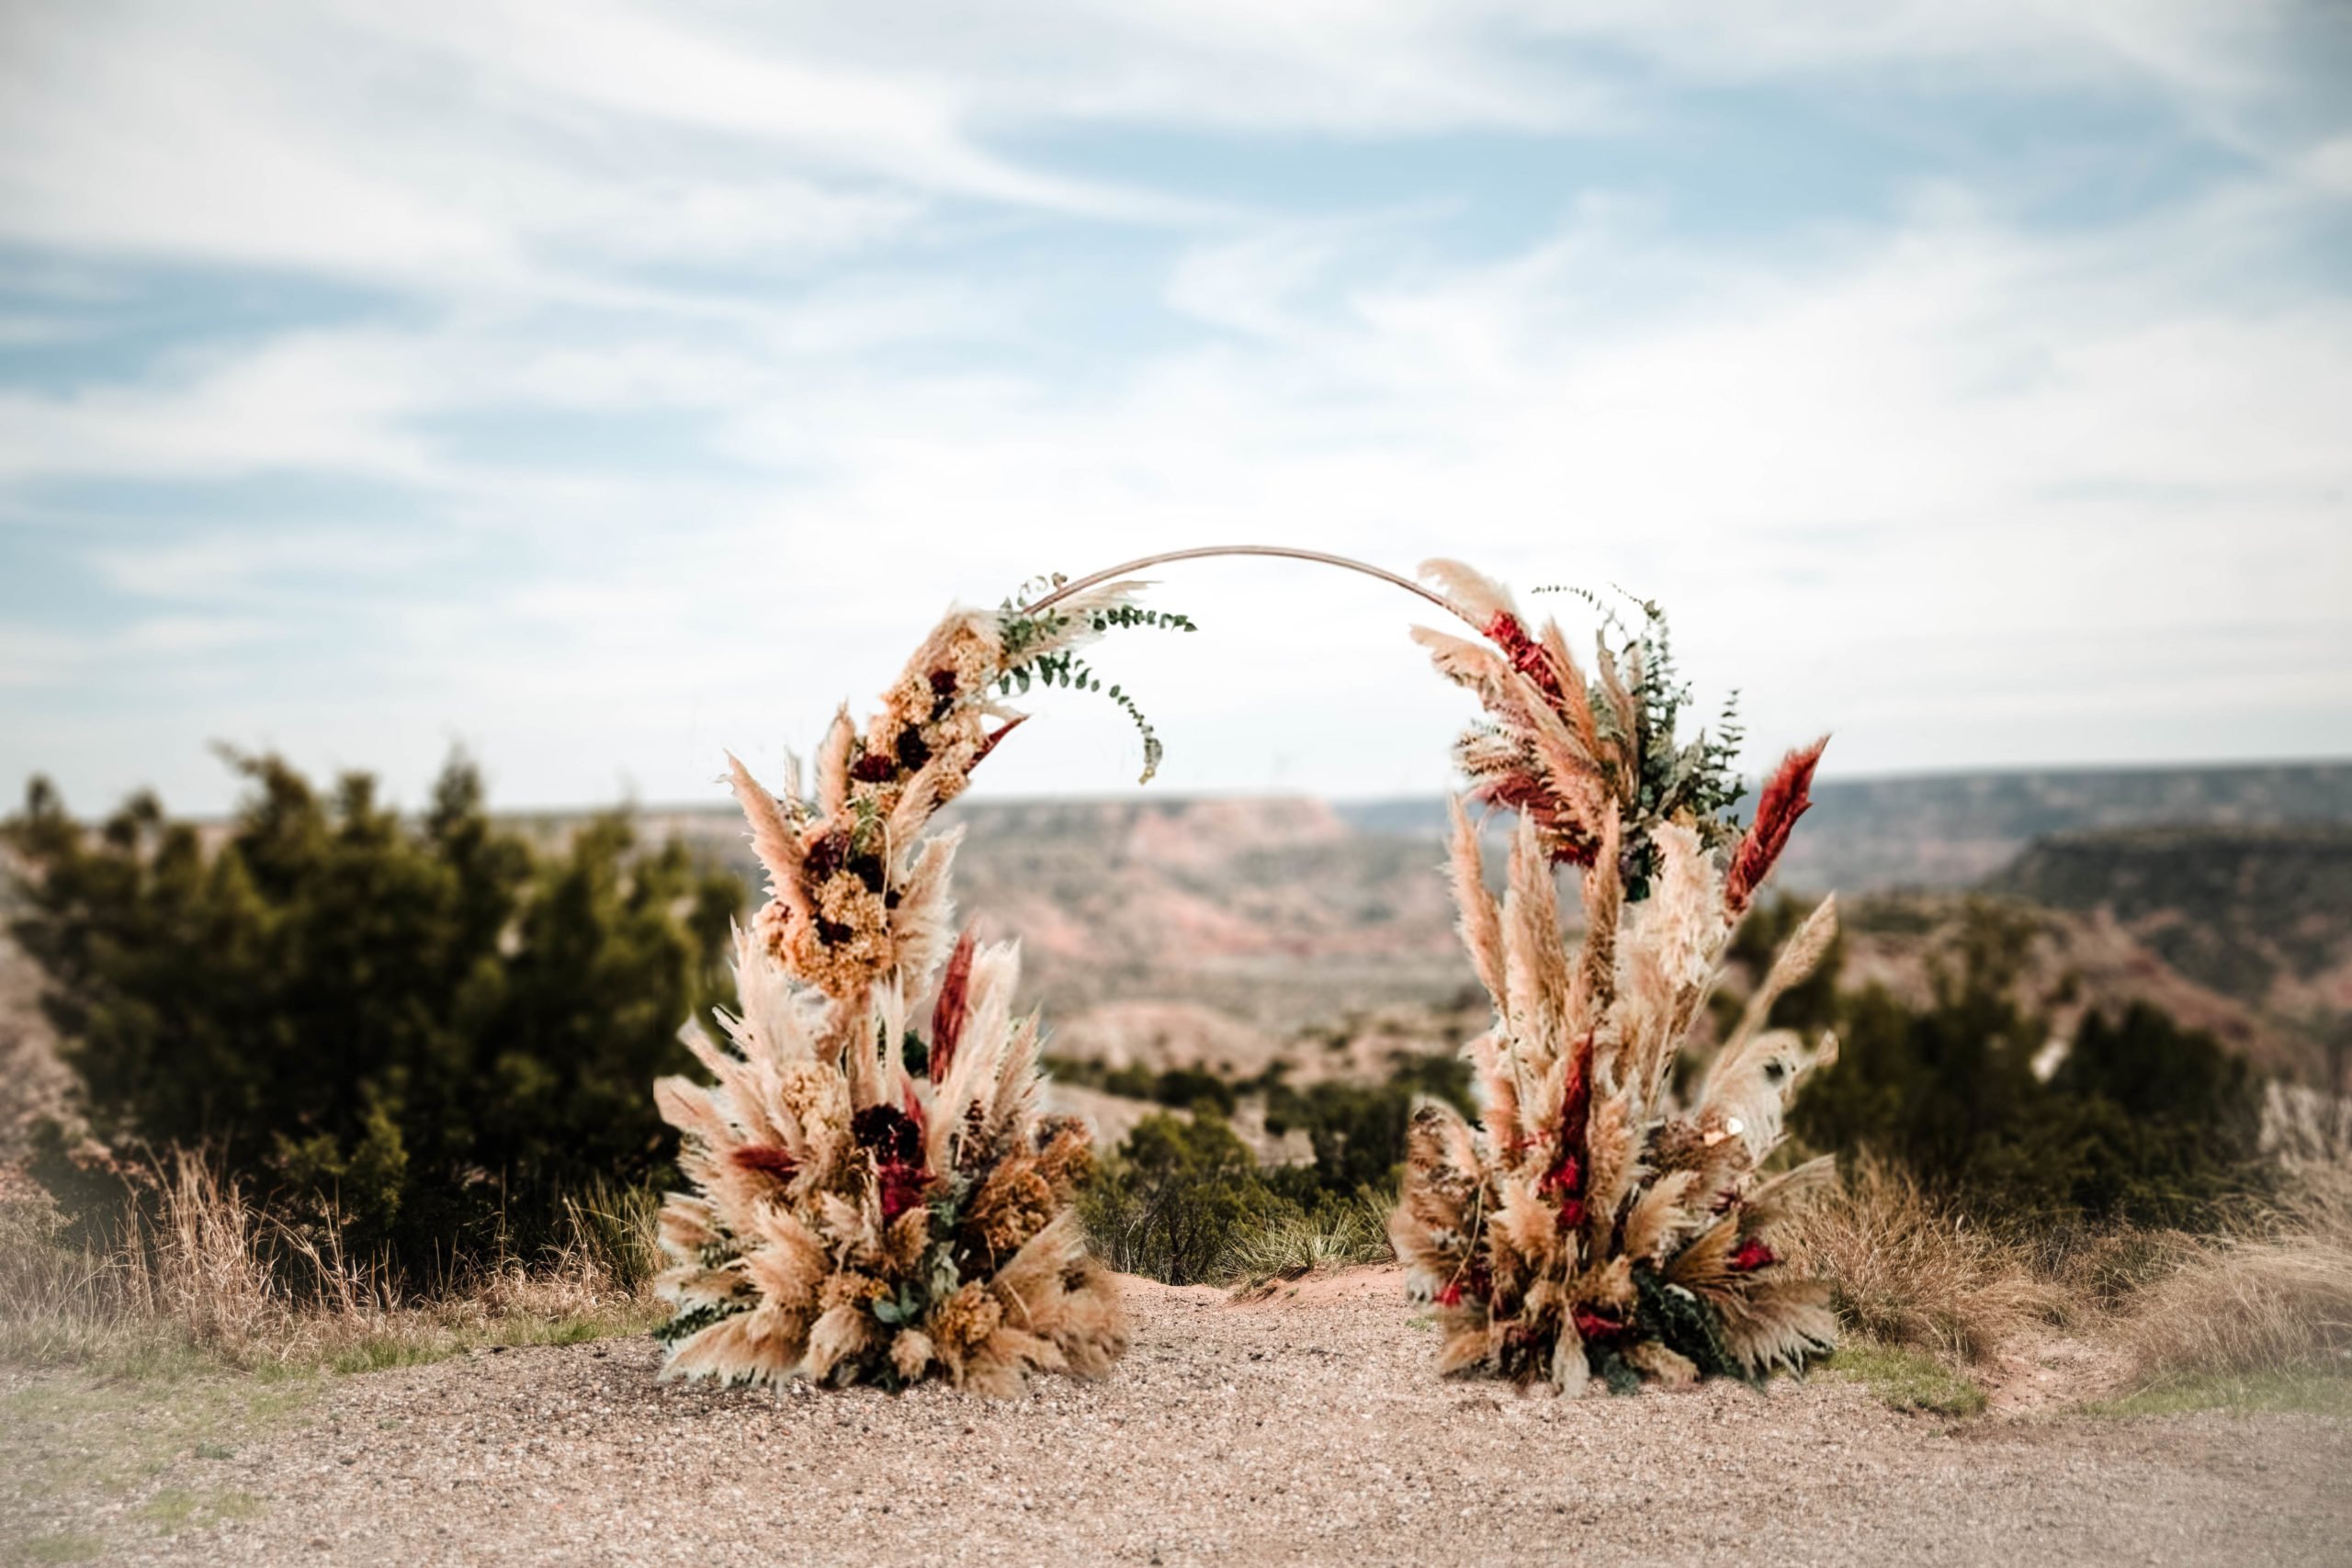 desert elopement, elopement in texas, weddings in texas, second largest canyon in the united states, wedding decor, outdoor wedding decor, palo duro canyon weddings, palo duro canyon wedding, palo duro canyon elopement, palo duro canyon camping, palo duro canyon, palo duro canyon photographer, palo duro canyon adventure photographer, lighthouse trail, canyon weddings, destination weddings, destination elopements, texas elopements, texas weddings, outdoor wedding, brit nicole photography, photographer near me, canyon wedding photographer, wedding photographer near me, camping tents, wedding tents, destination wedding texas